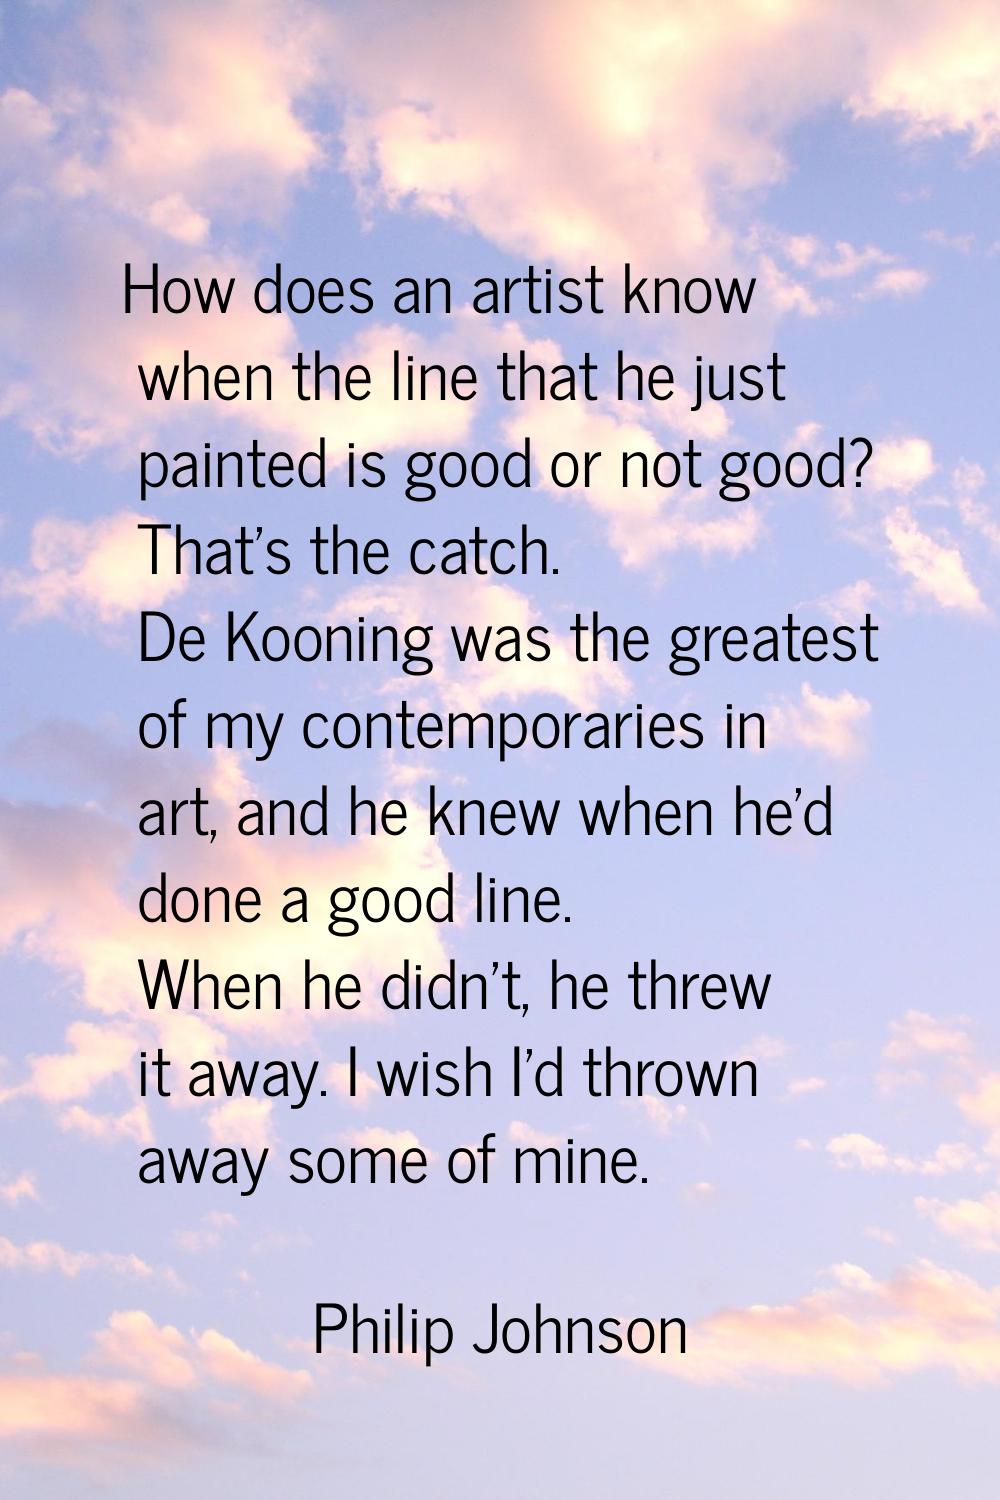 How does an artist know when the line that he just painted is good or not good? That's the catch. D